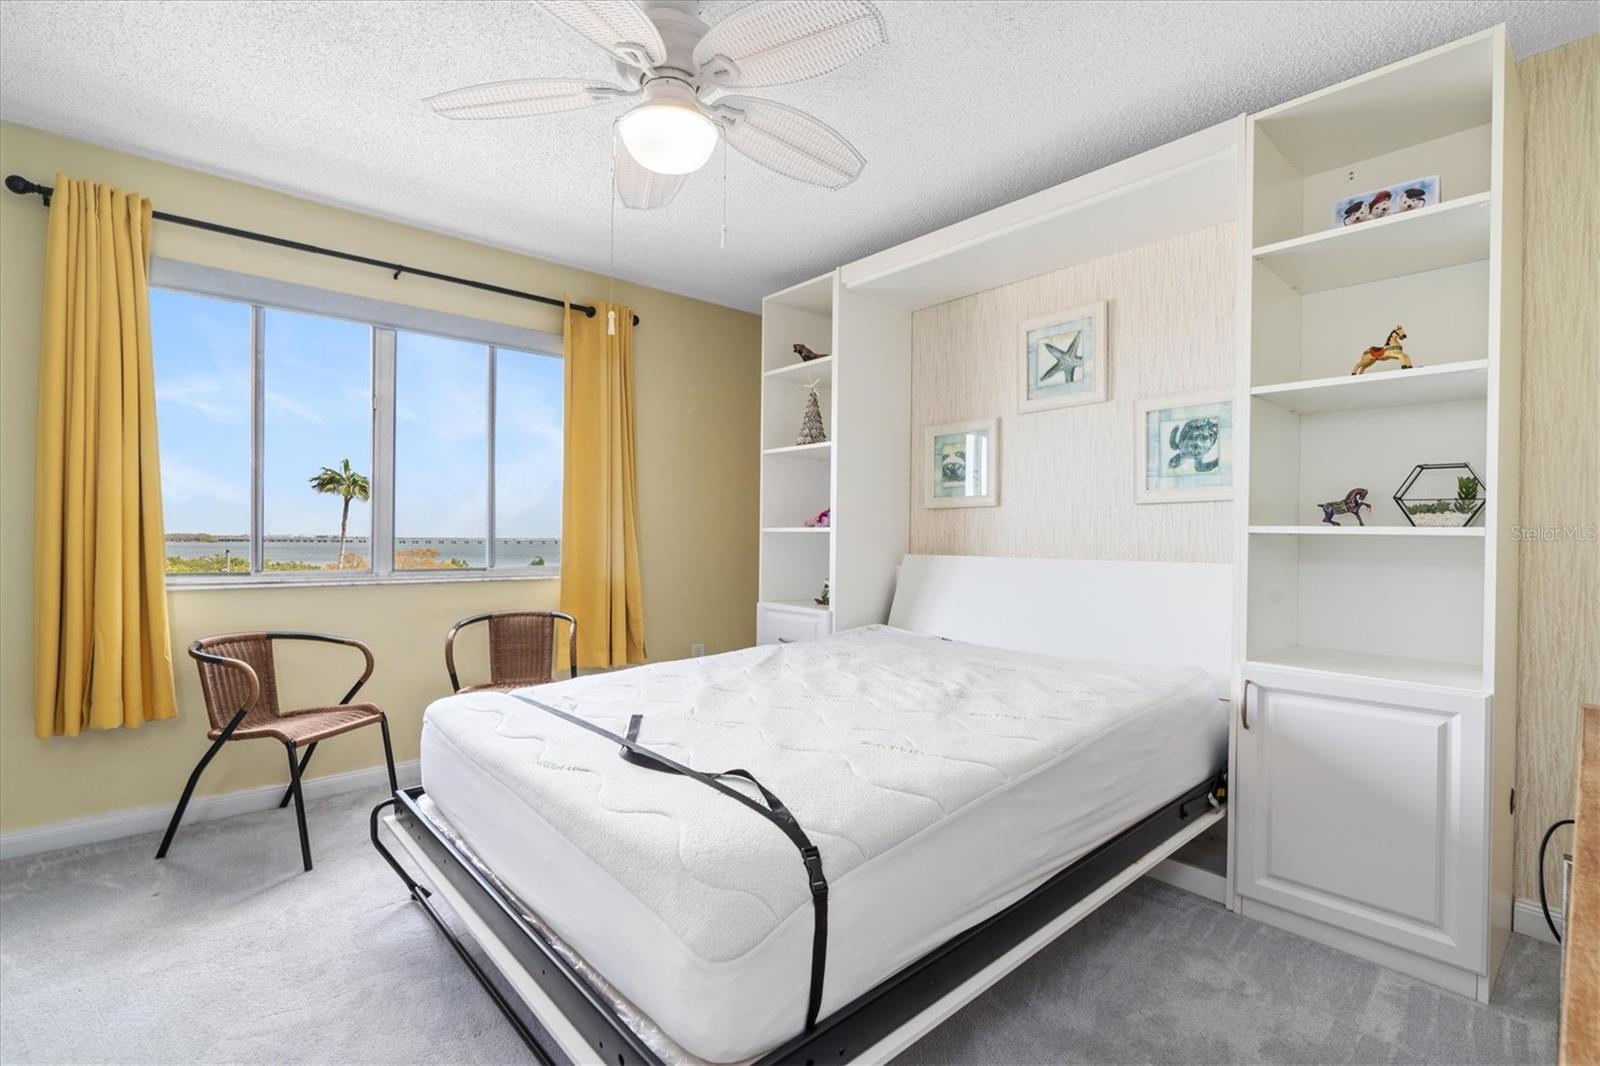 Bedroom 2 with murphy bed down, ceiling fan, and views of Tampa Bay